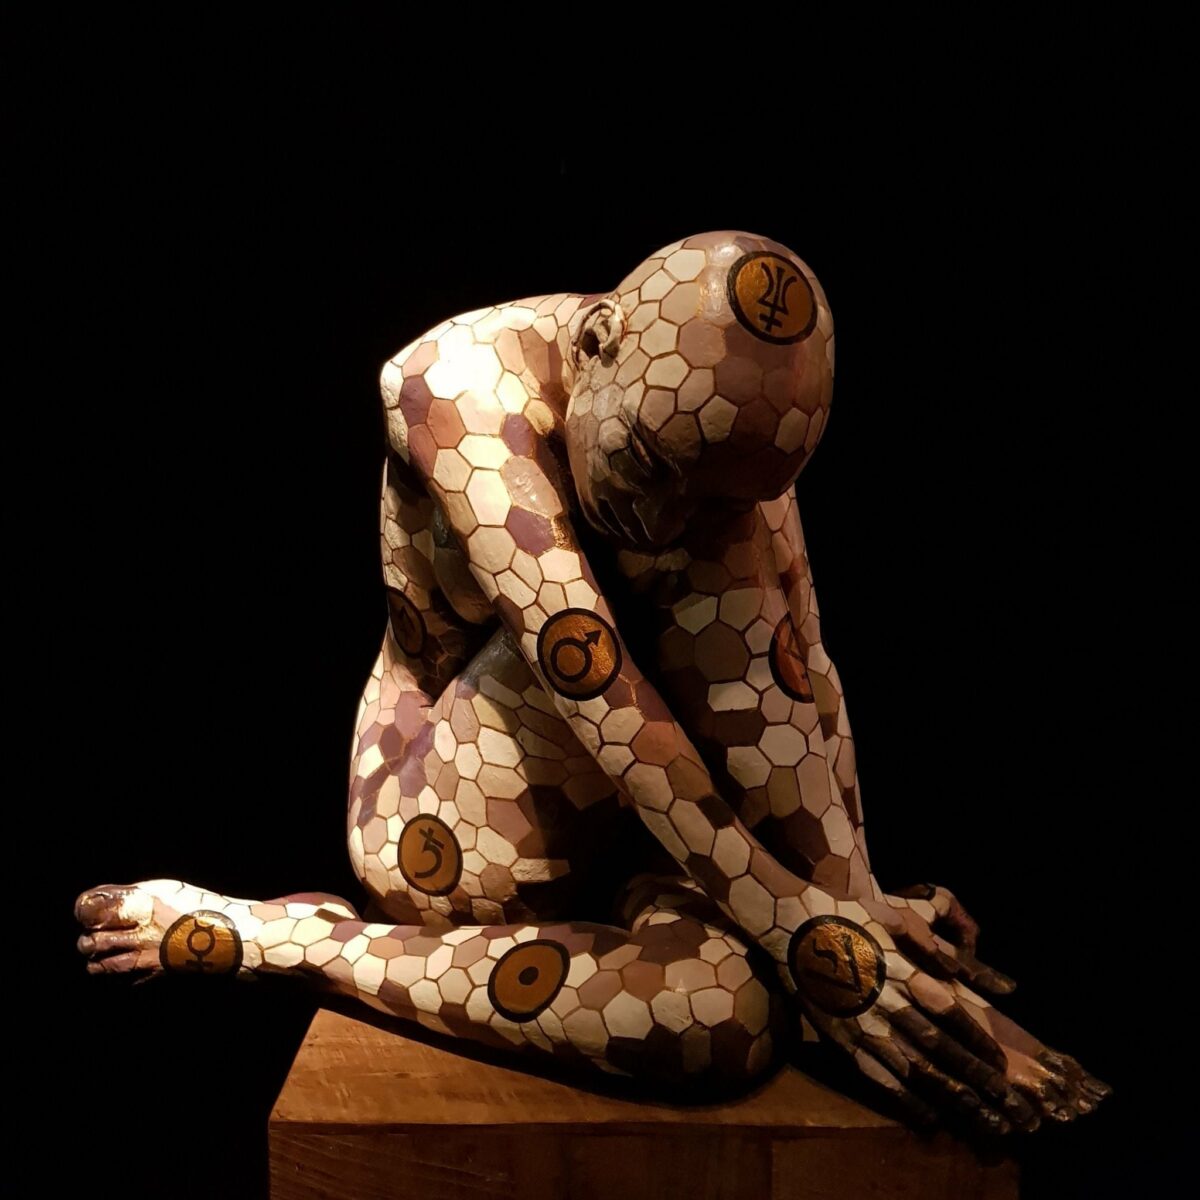 Expressive Figurative Sculptures Gorgeously Covered By Colorful Patterns By Paola Epifani Rabarama 7